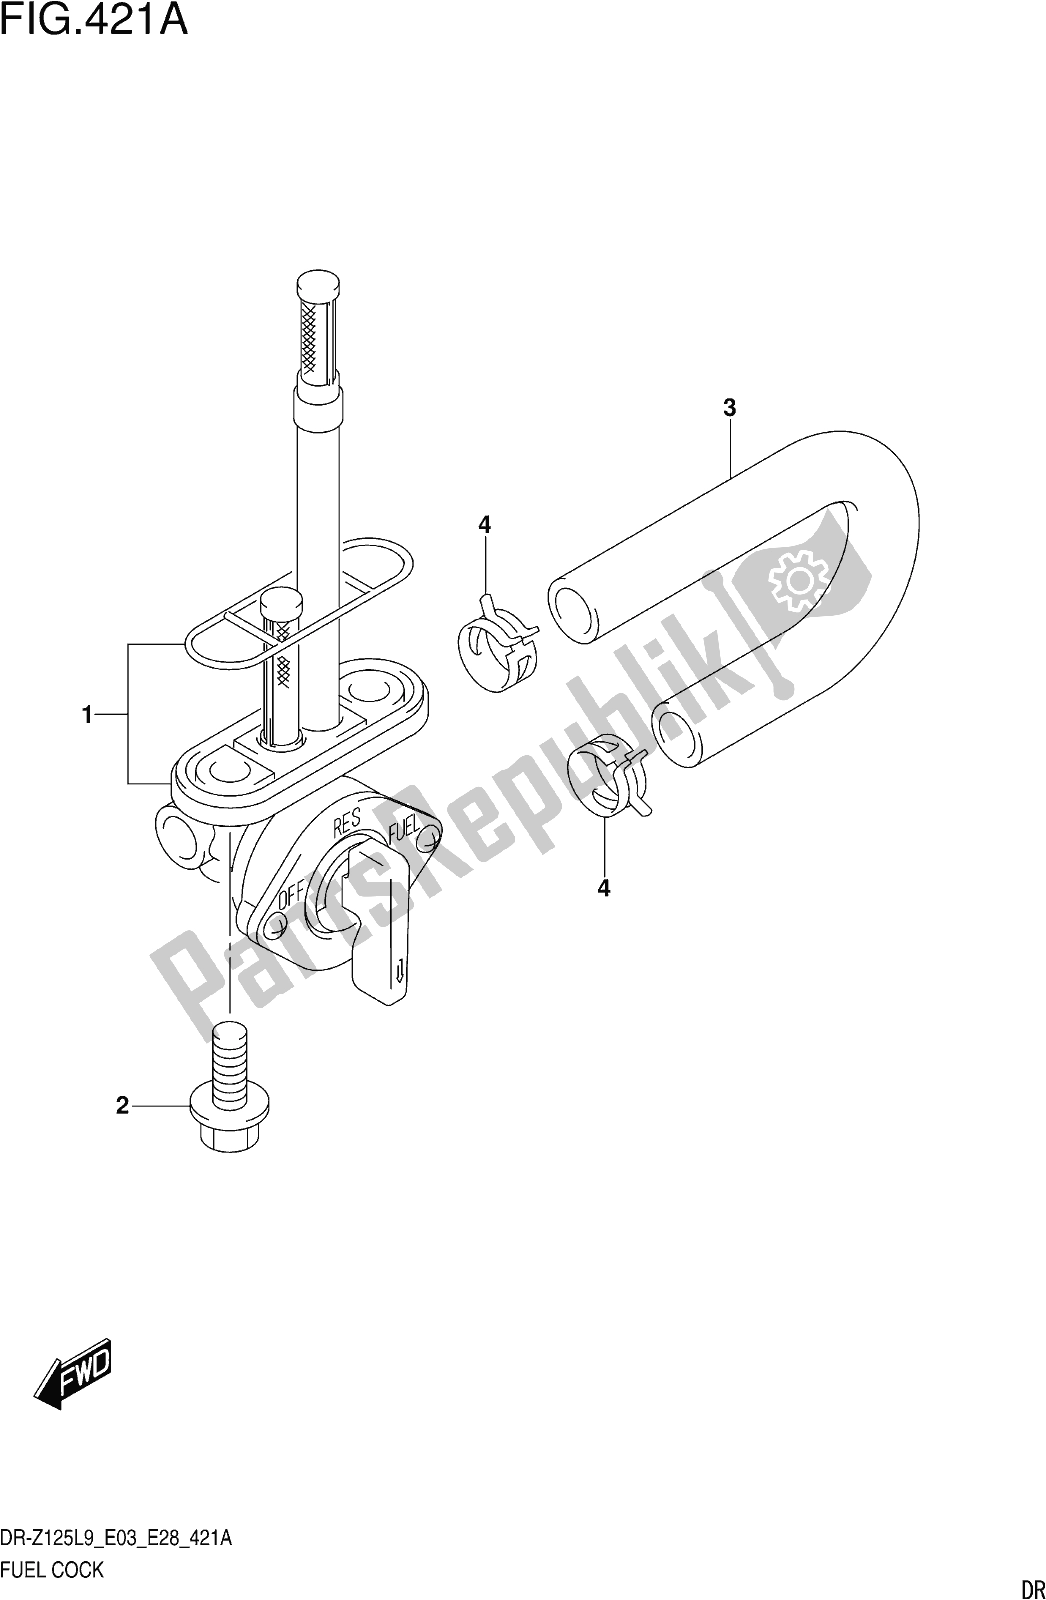 All parts for the Fig. 421a Fuel Cock of the Suzuki DR-Z 125 2019